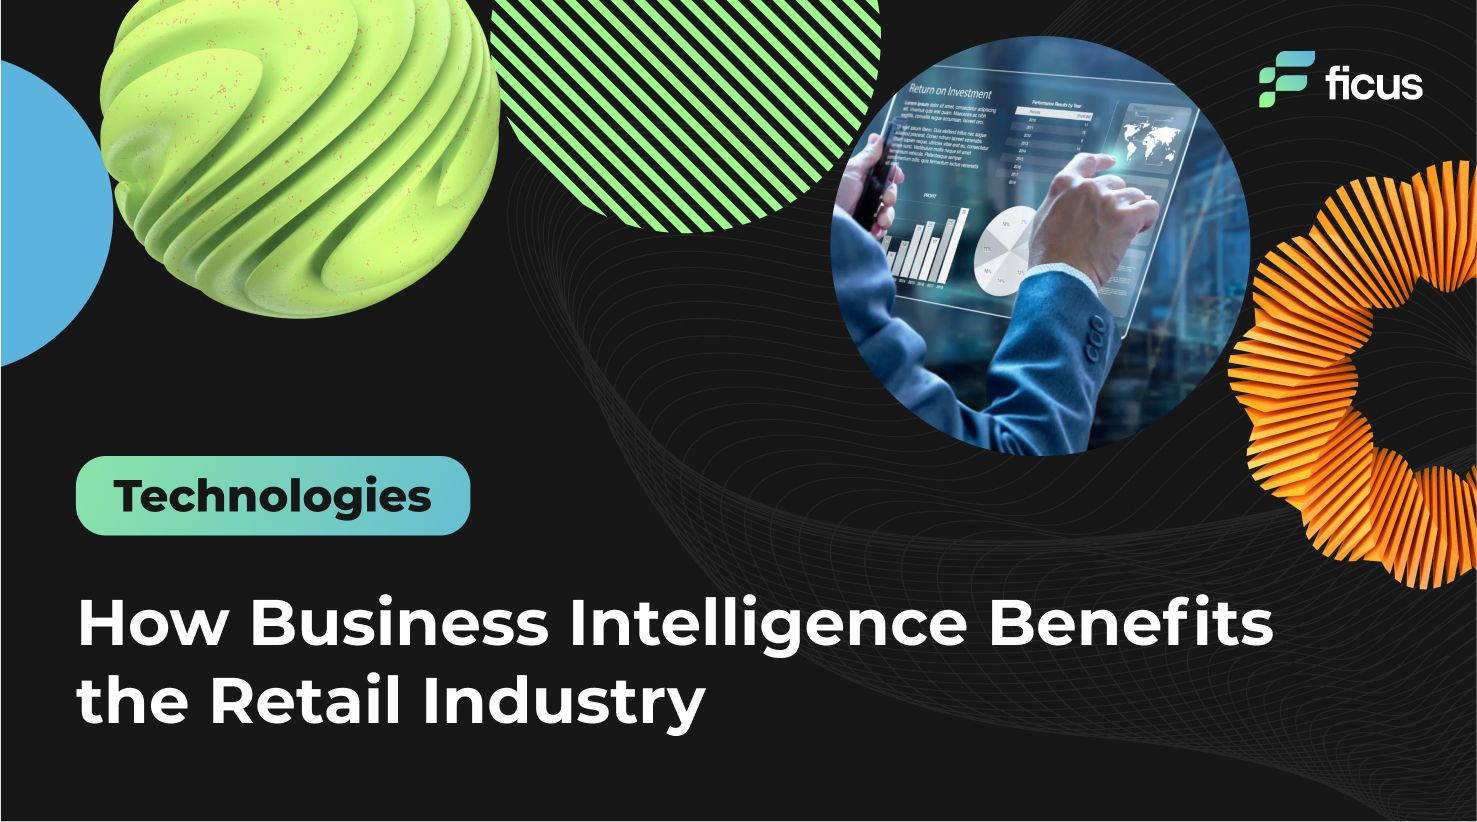 How Business Intelligence Benefits the Retail Industry